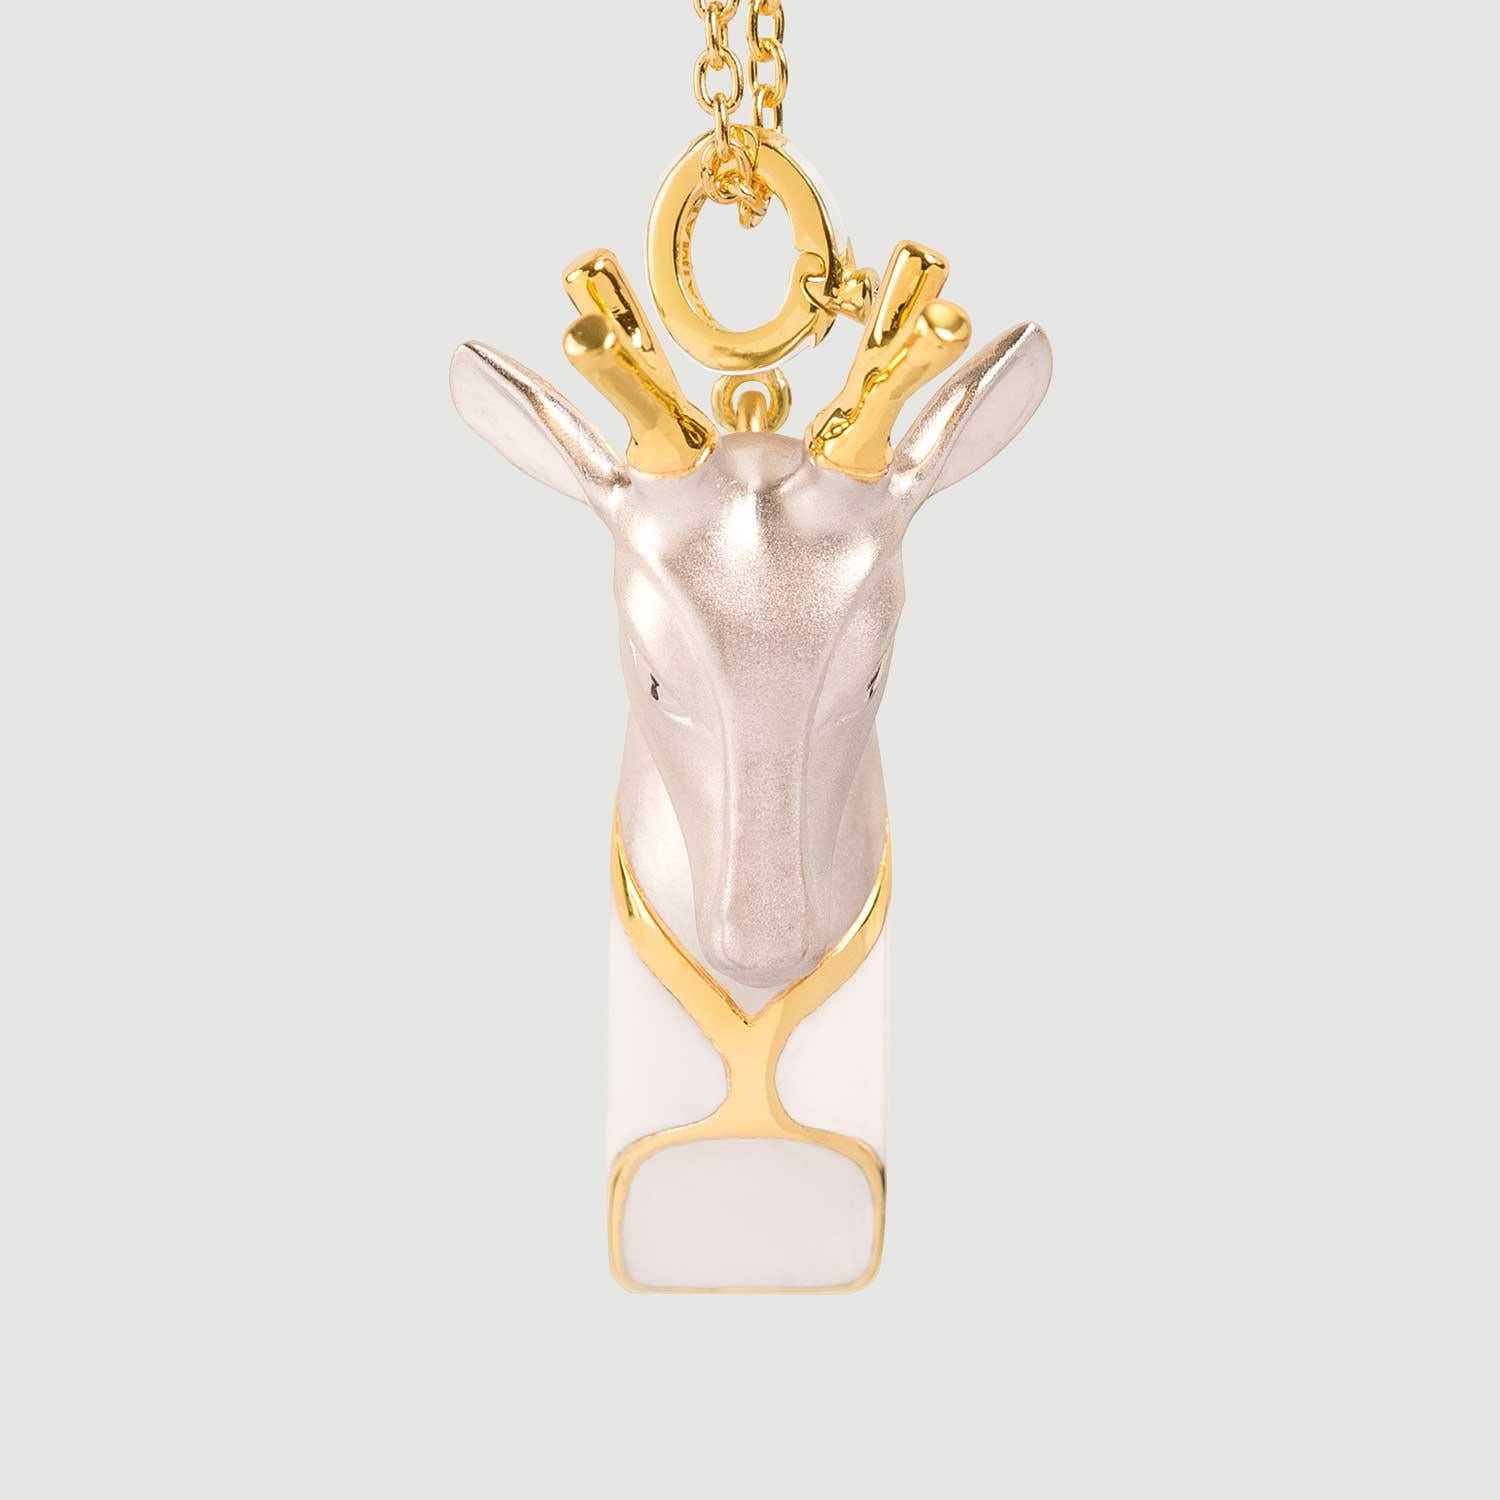 Deer are important figures in the myths and folklore of many cultures around the world. 

The Csodaszarvas, Miraculous Deer, is a central element in Hungarian mythology, thus seen as a powerful goddess of fertility and a divine guide – it led to the